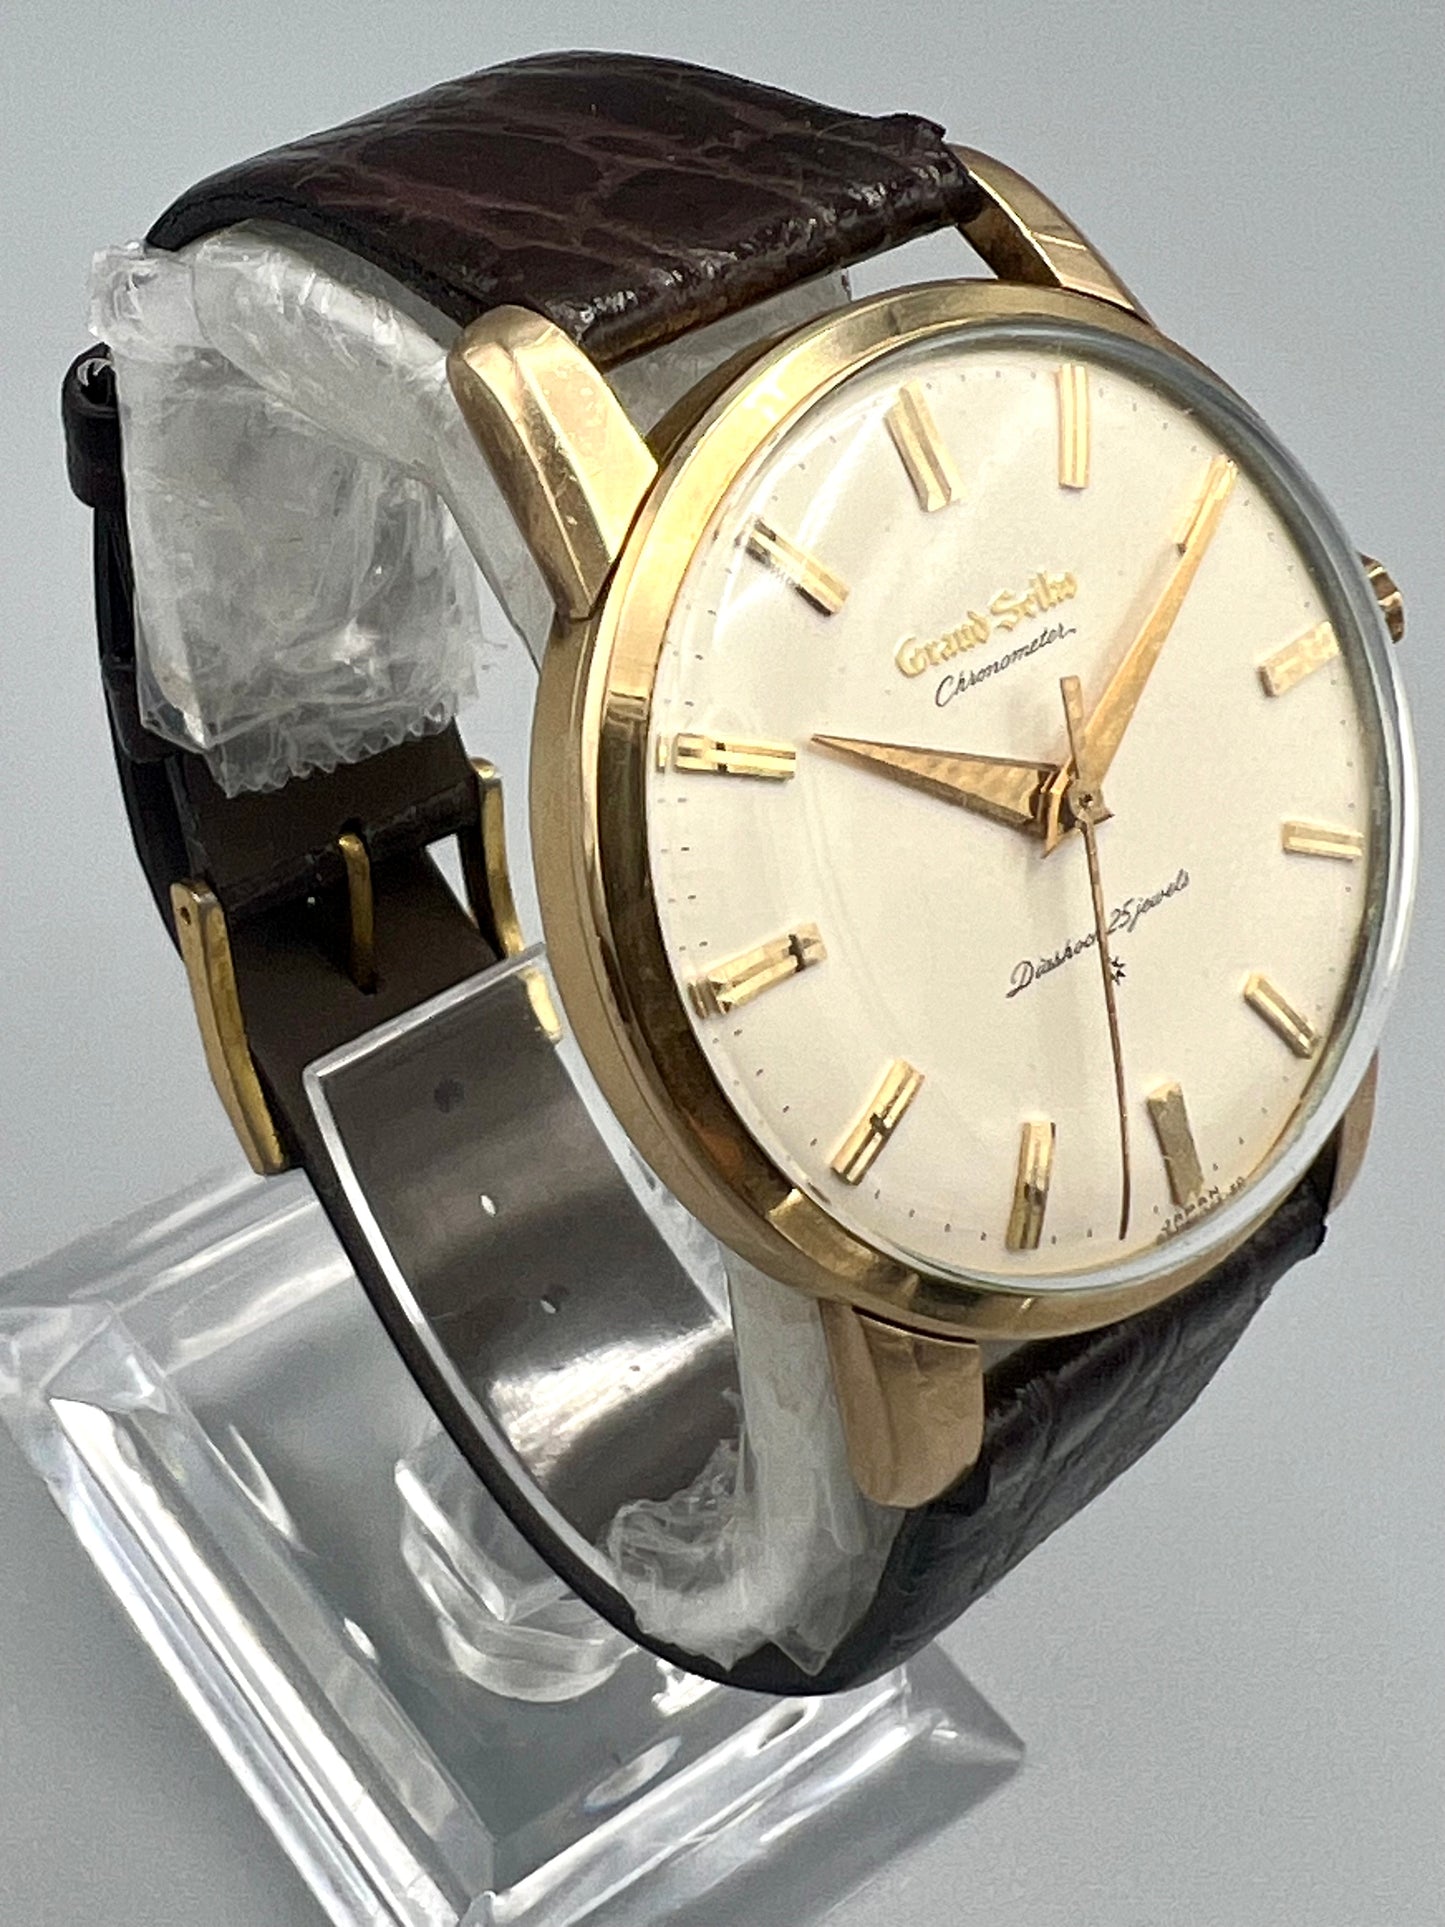 Grand Seiko "First" Ref 3180 SD (Special Dial) Exceptional Condition, 1963